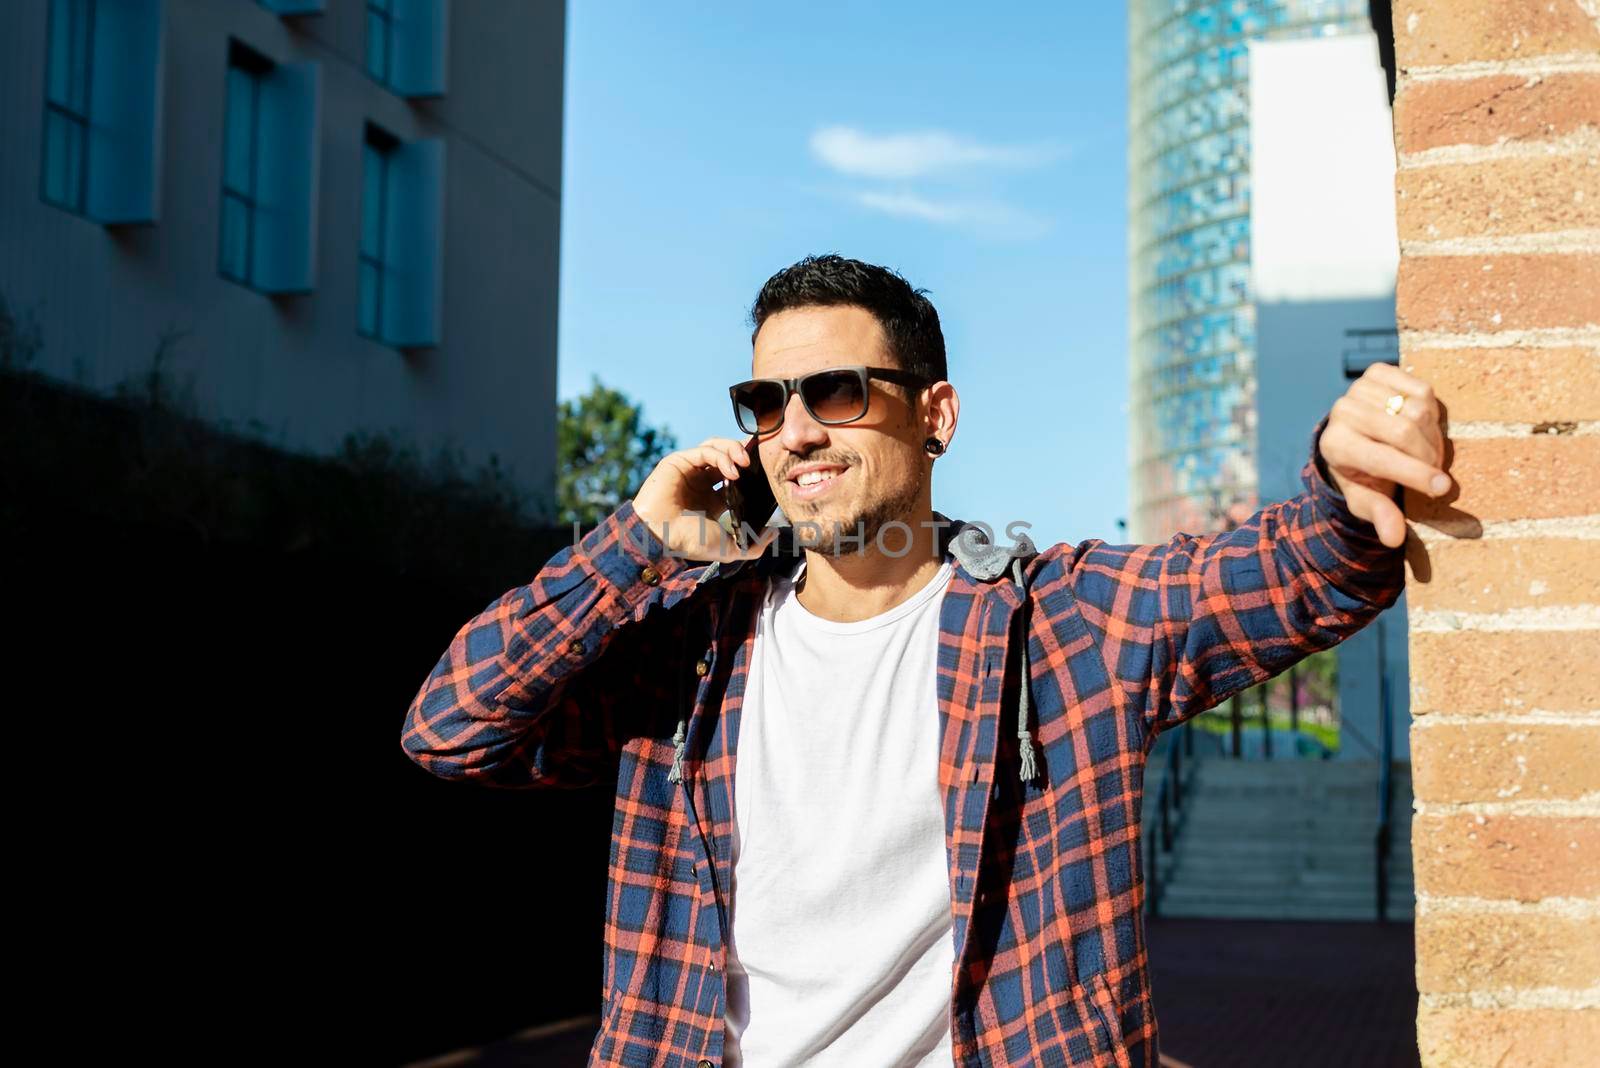 Young male smiling and talking on mobile phone outside